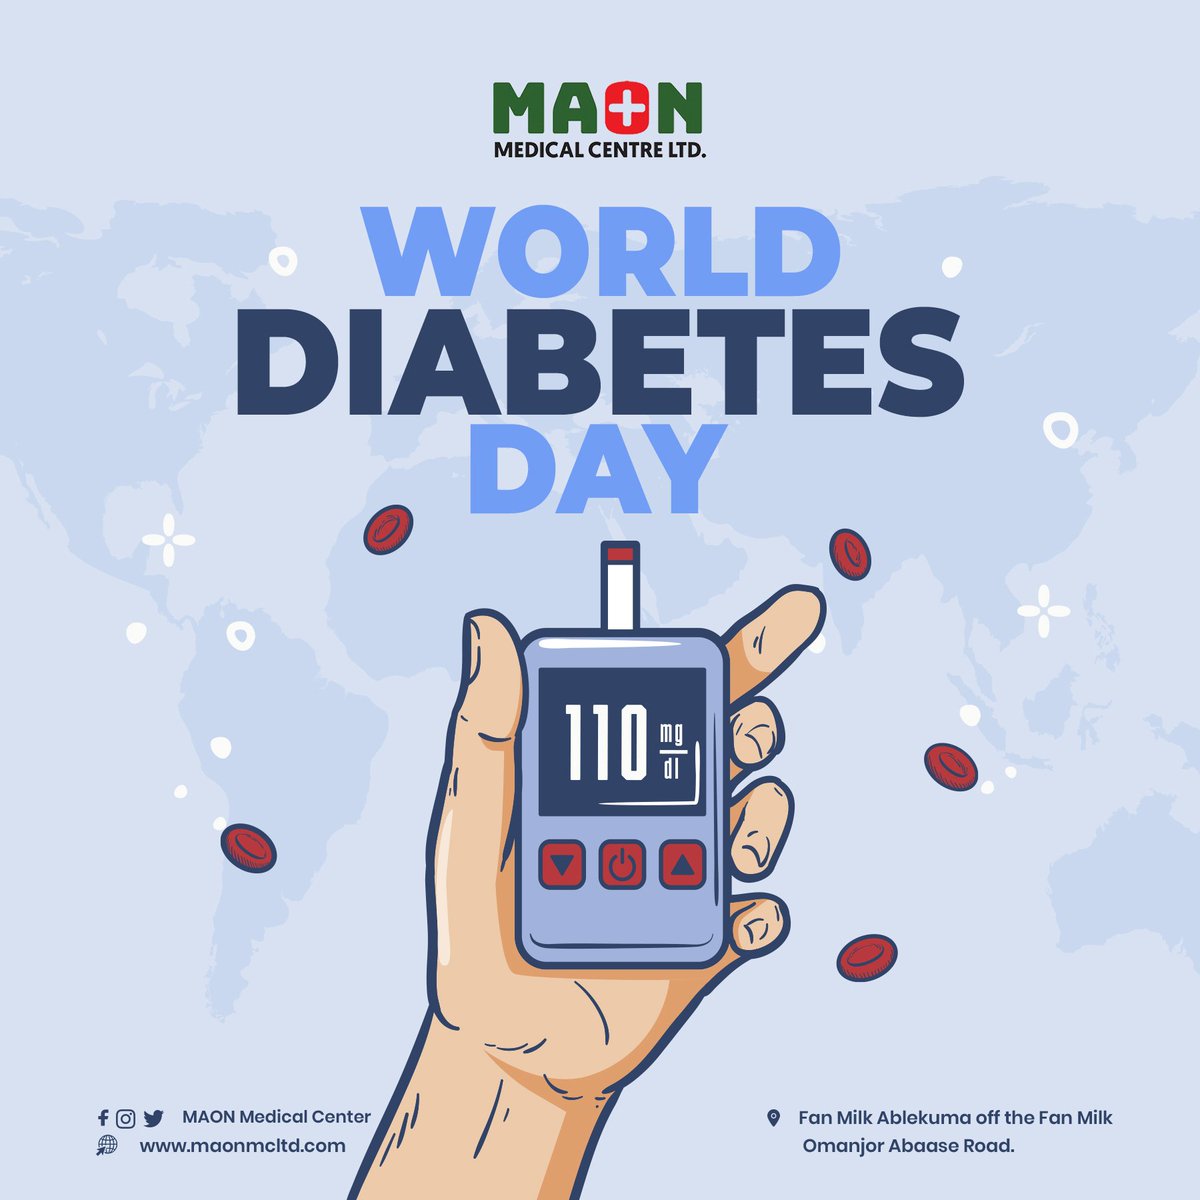 Spread Awareness, Fight Diabetes! 💪🩸 Let's come together to make a difference and support those affected. #WorldDiabetesAwareness #WorldDiabetesDay #DiabetesAwareness #DiabetesPrevention #FightDiabetes #Type1Diabetes #Type2Diabetes #HealthyLiving #DiabetesSupport